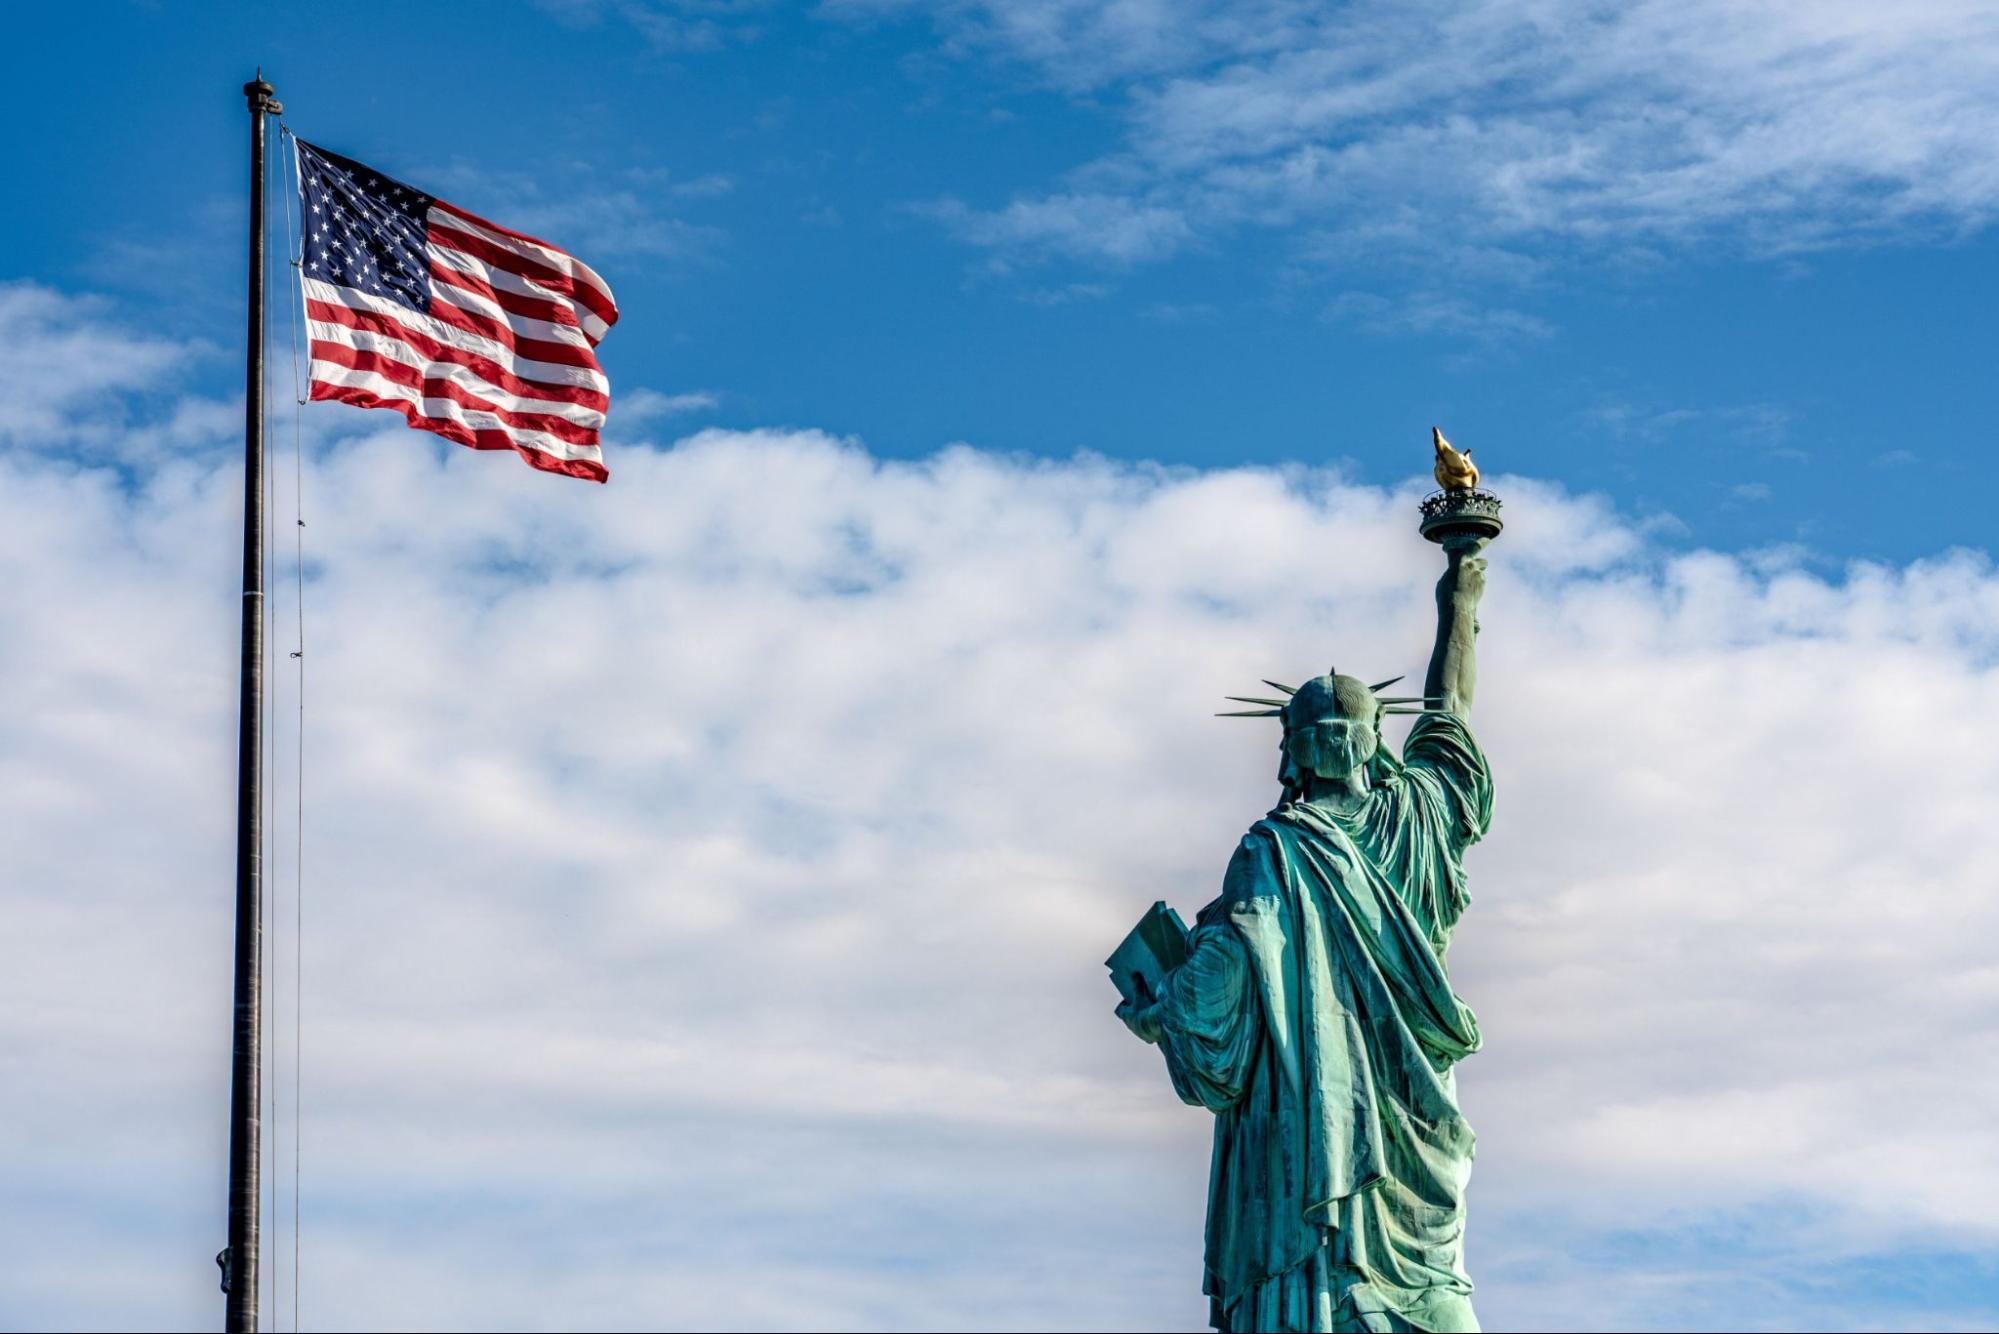 View of the United States flag and the Statue of Liberty on Liberty Island on October 10, 2019 in New York